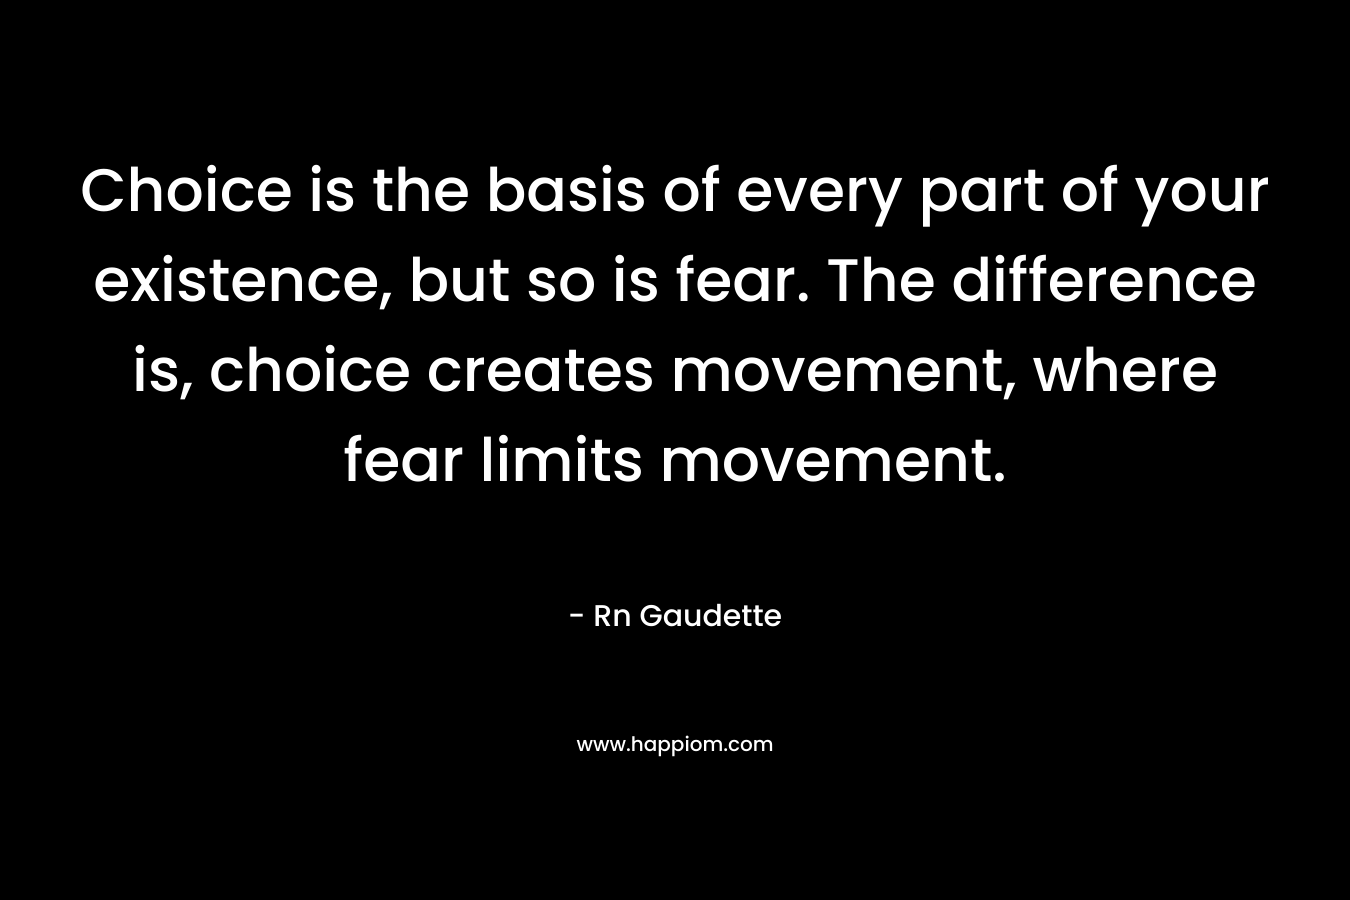 Choice is the basis of every part of your existence, but so is fear. The difference is, choice creates movement, where fear limits movement. – Rn Gaudette